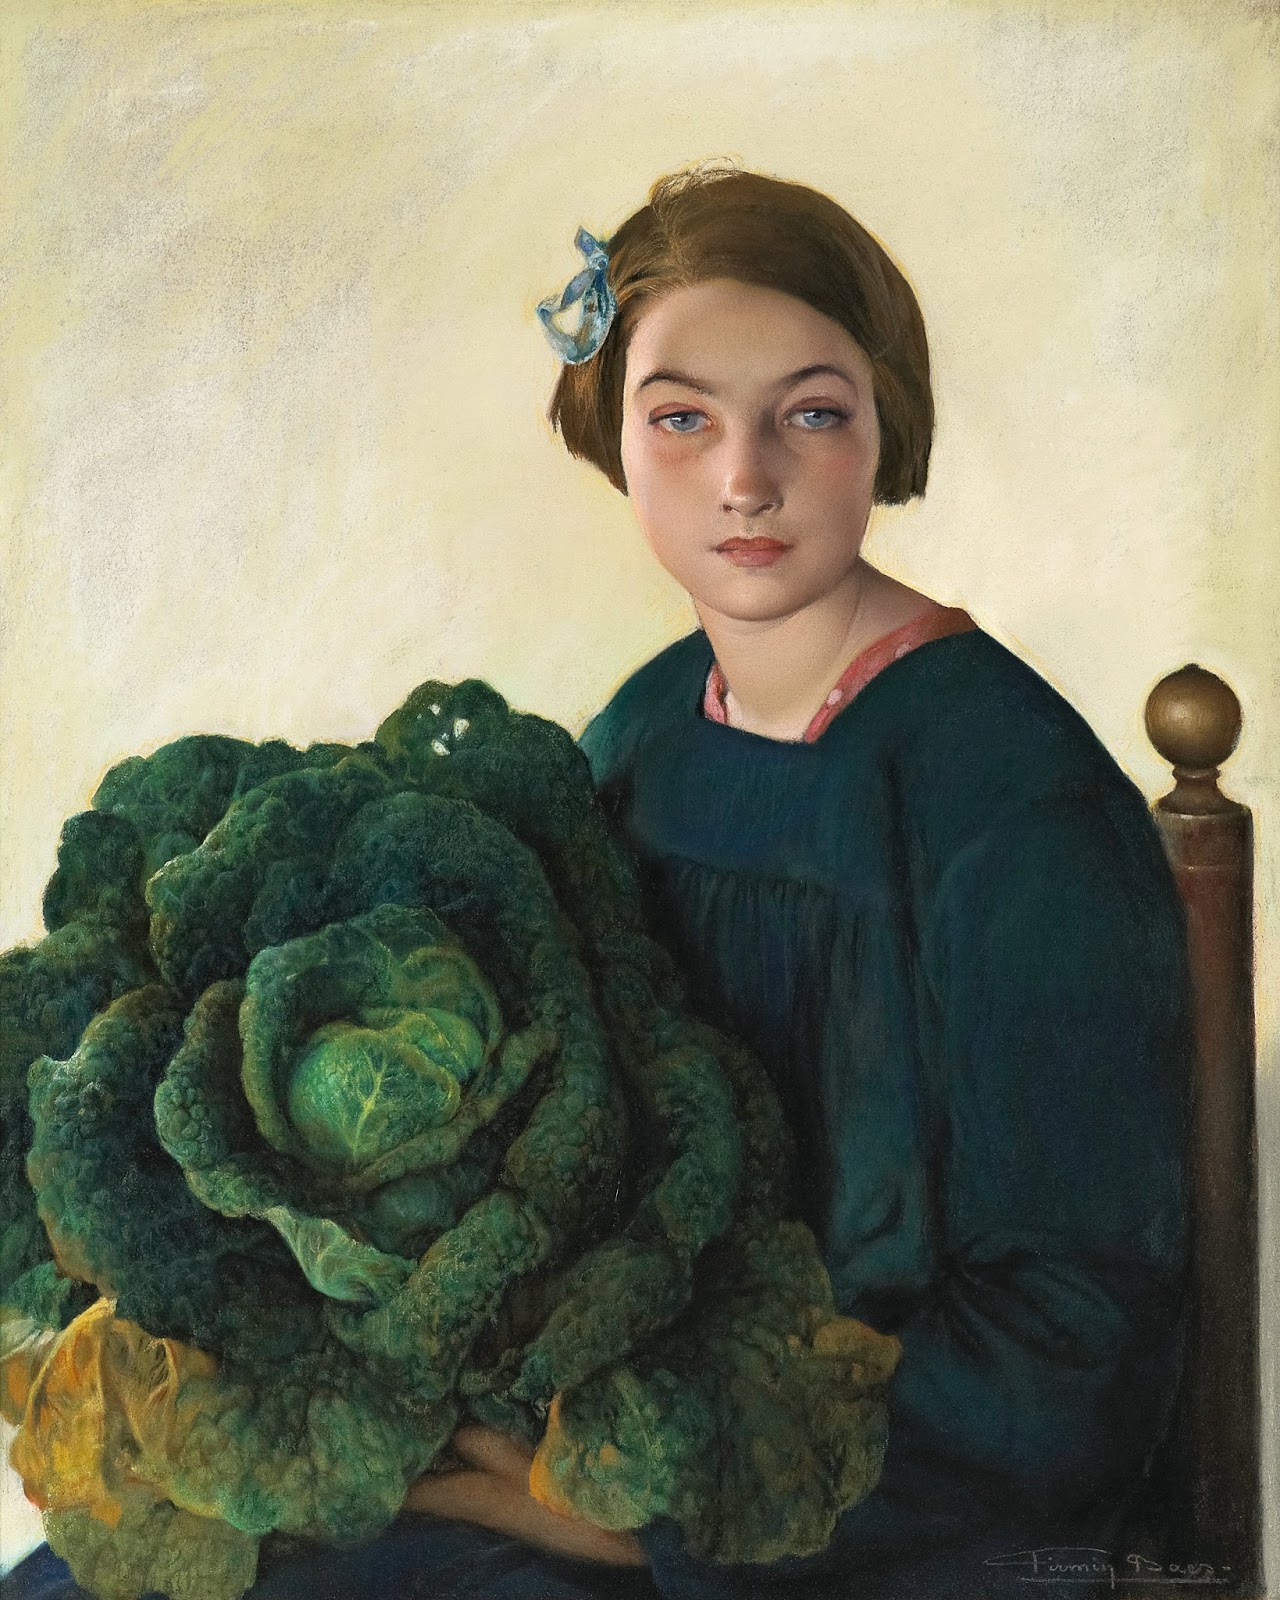 The Young Girl and the Cabbage by Firmin Baes - ca. 1903 - 85 x 70.5 cm private collection